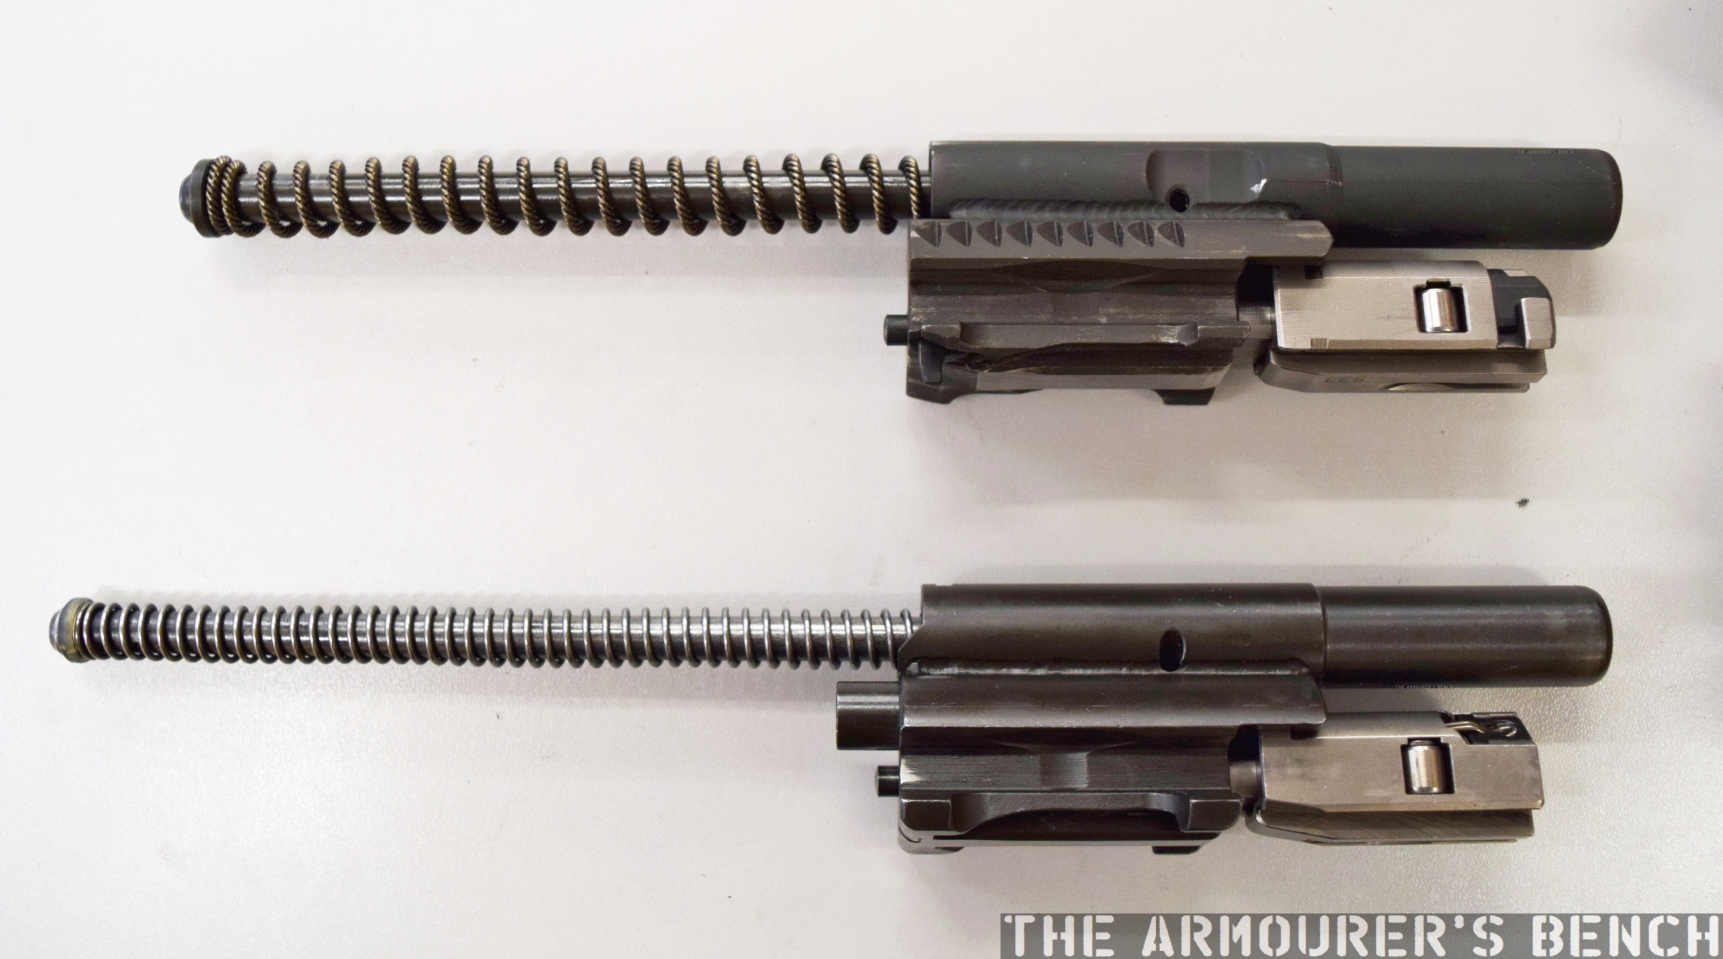 The bolts of the HK G41 (top) and HK33 (bottom), note the redesigned extrac...